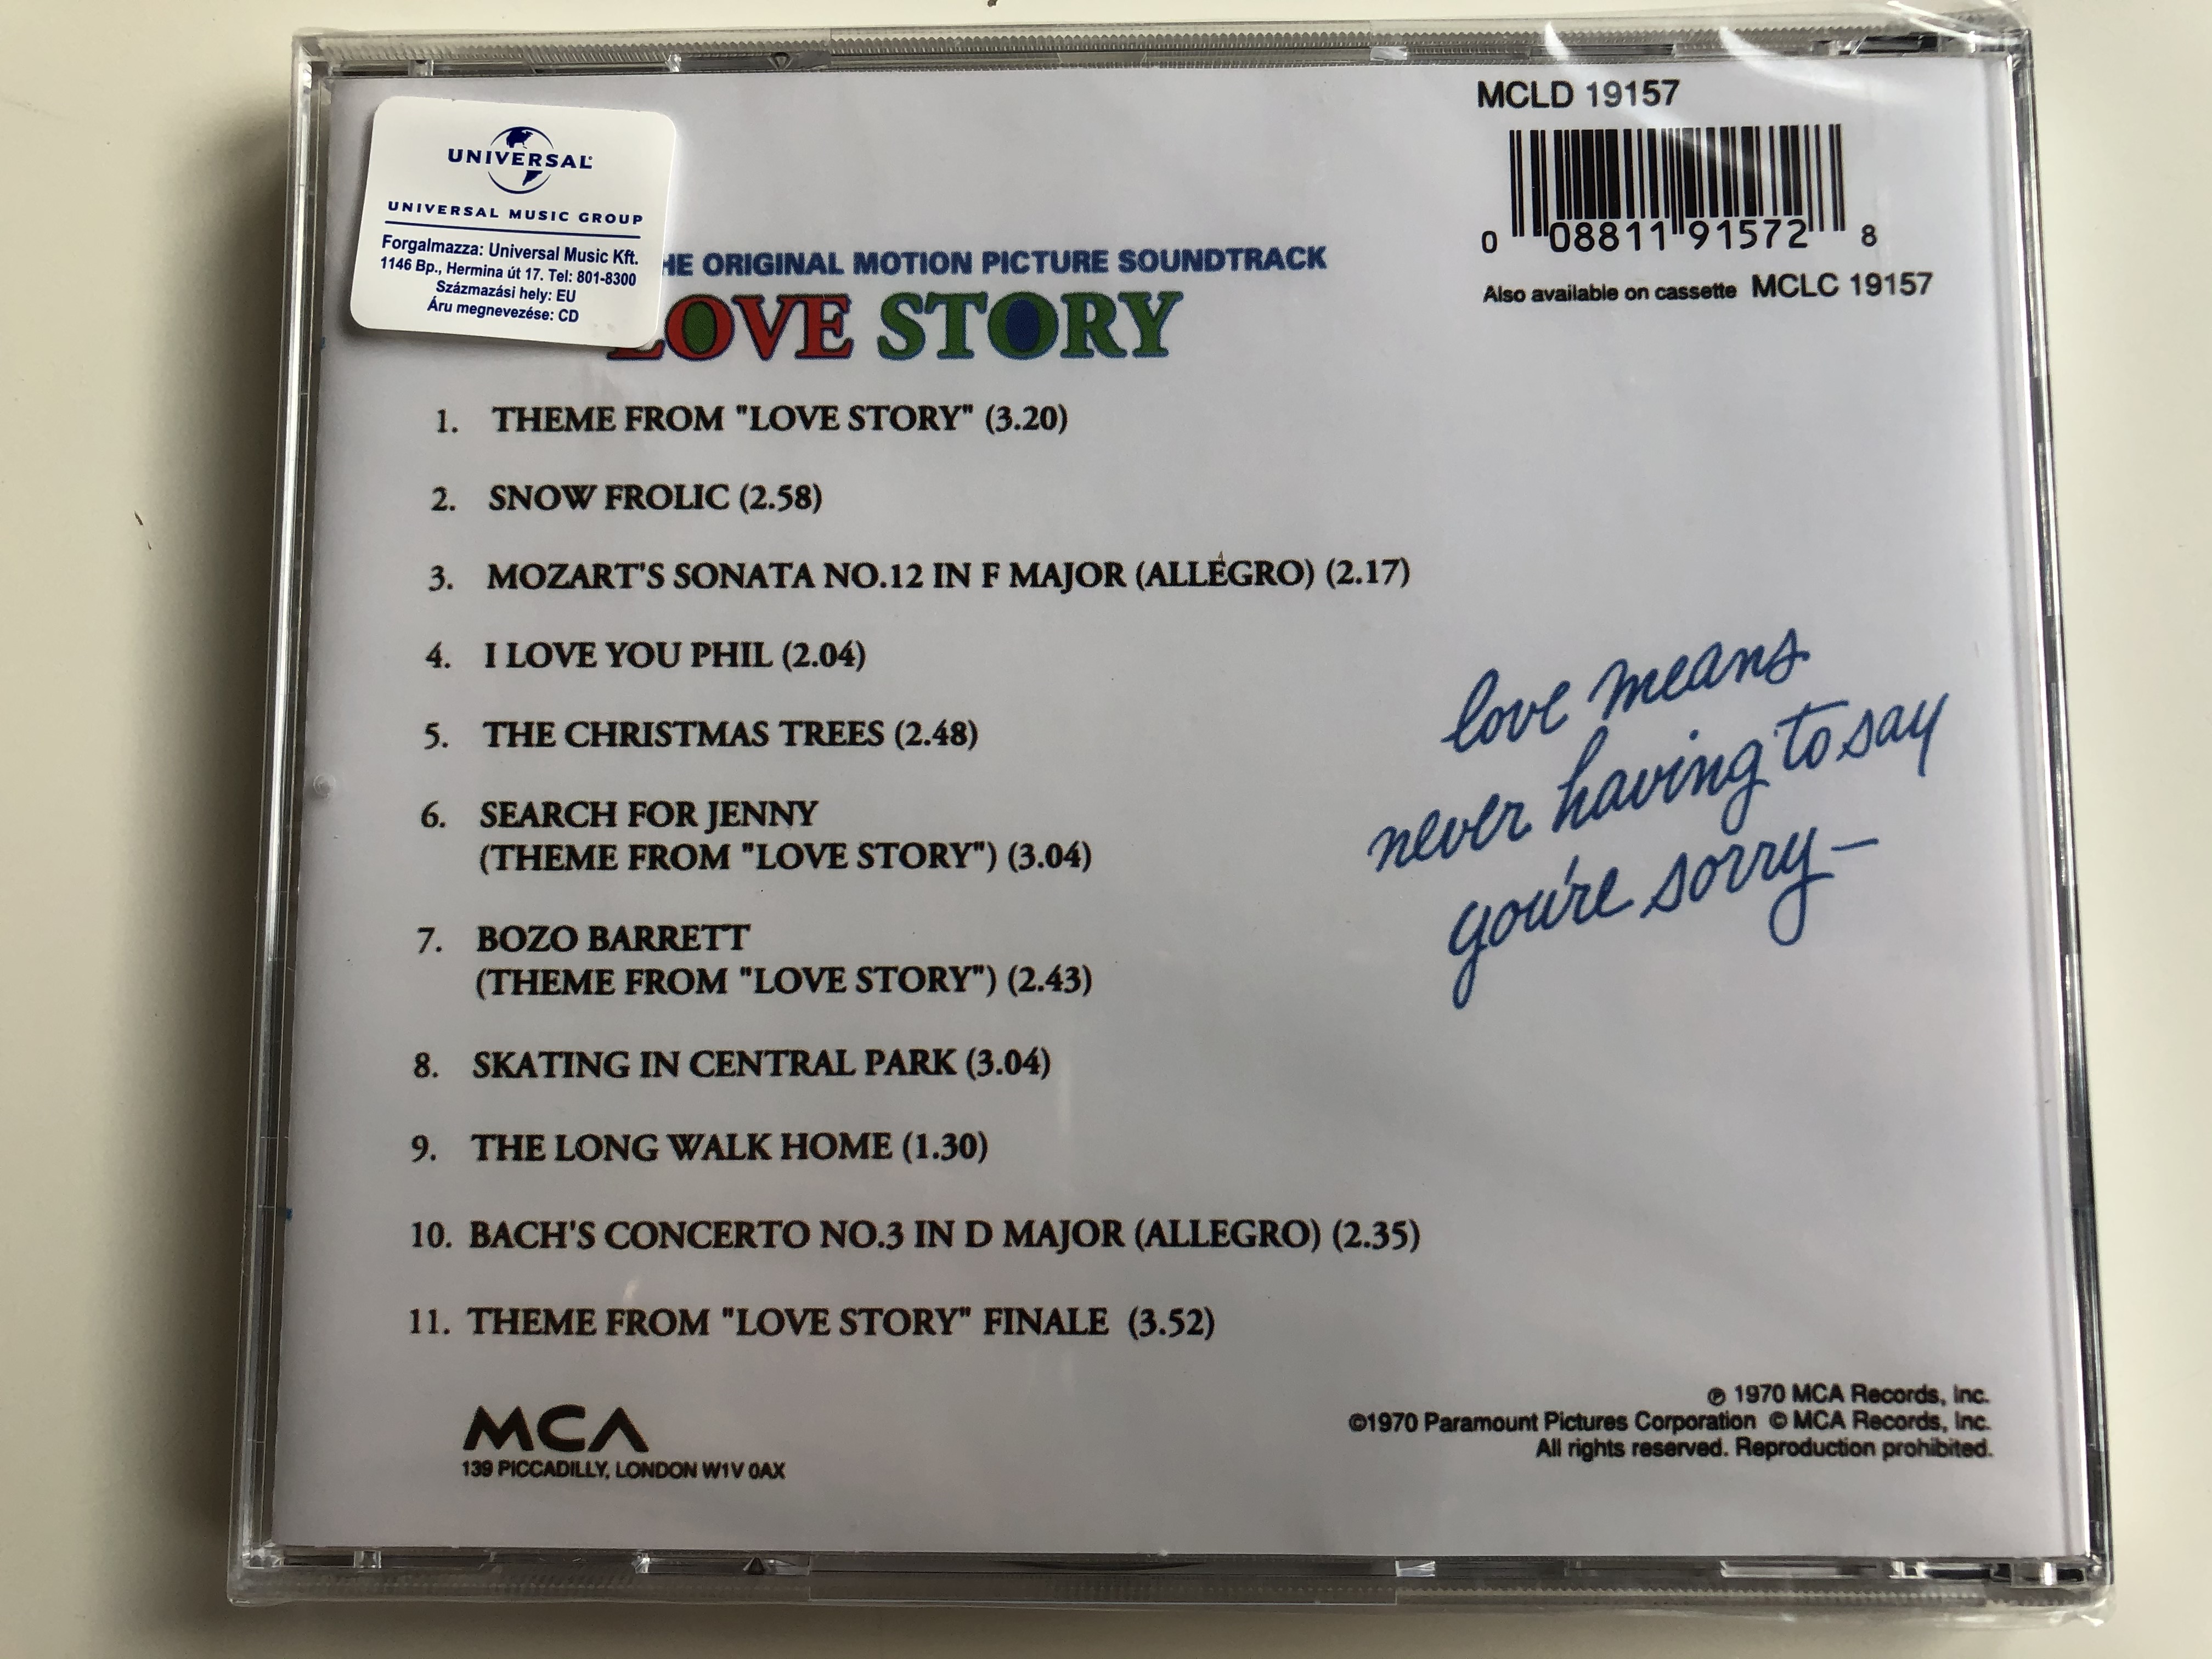 music-from-the-original-motion-picture-soundtrack-love-story-mca-records-audio-cd-mcld-19157-2-.jpg